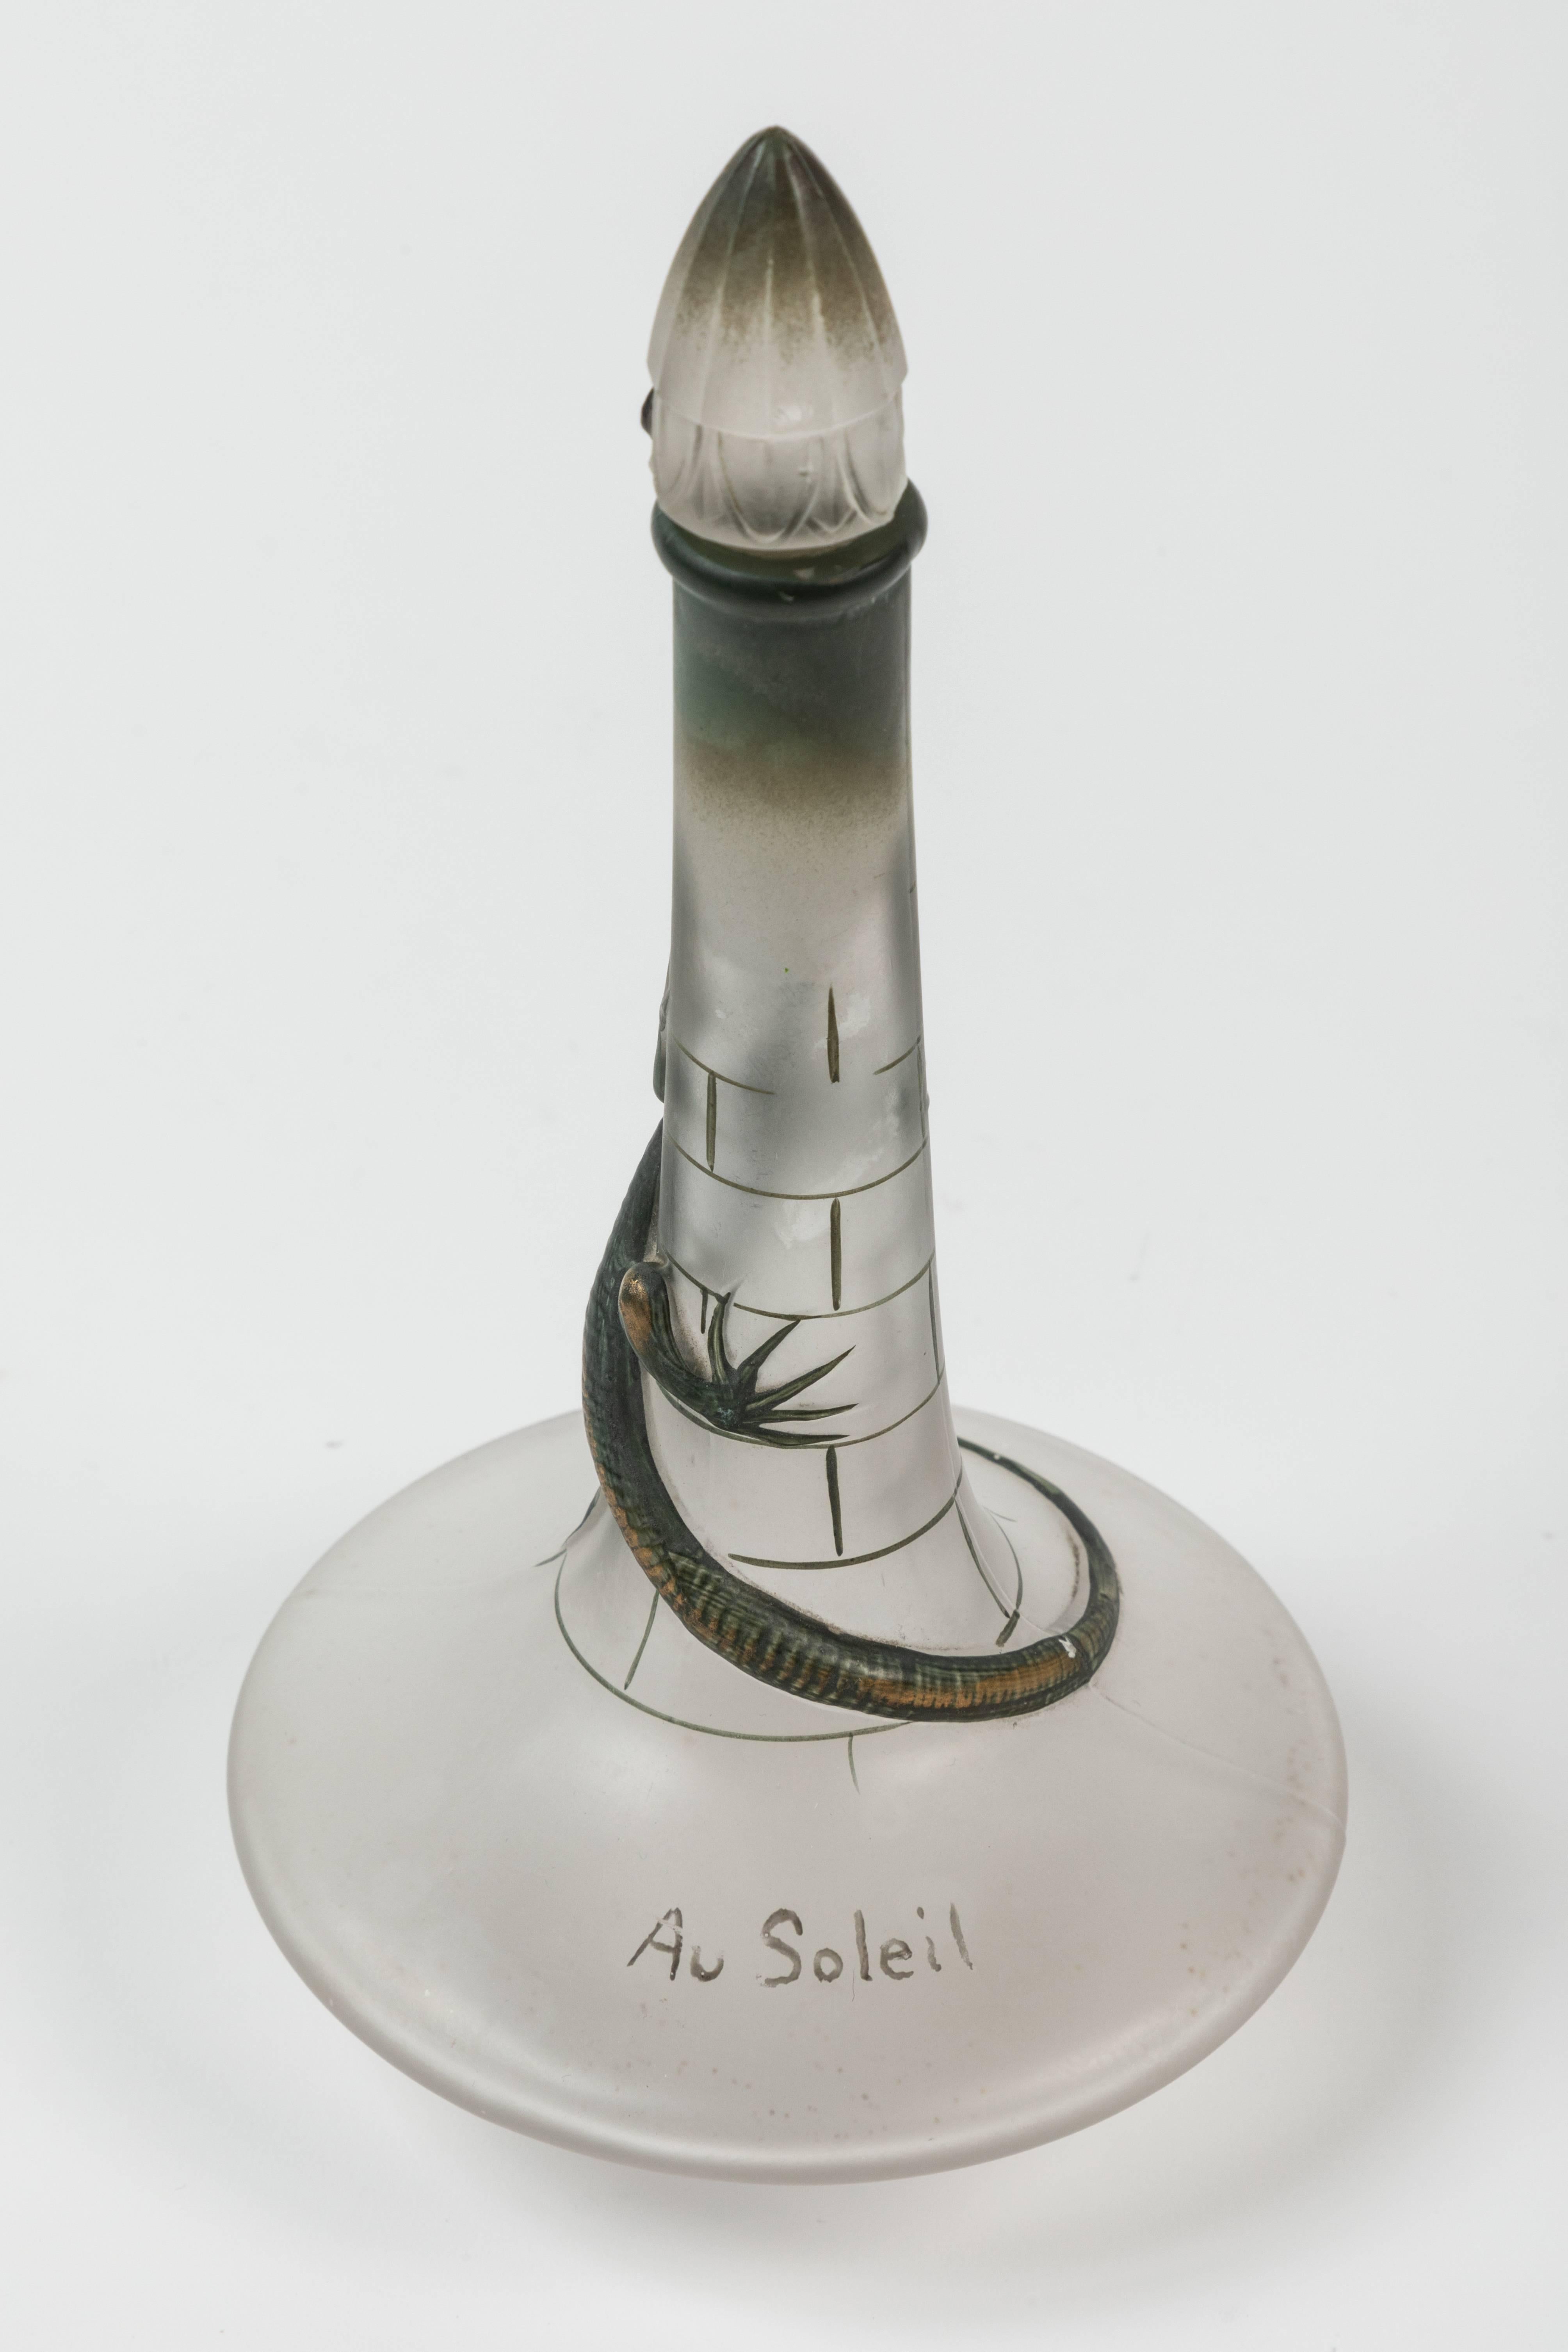 Early 20th Century Art Nouveau Perfume Bottle by Maurice Depinoix for Lubin